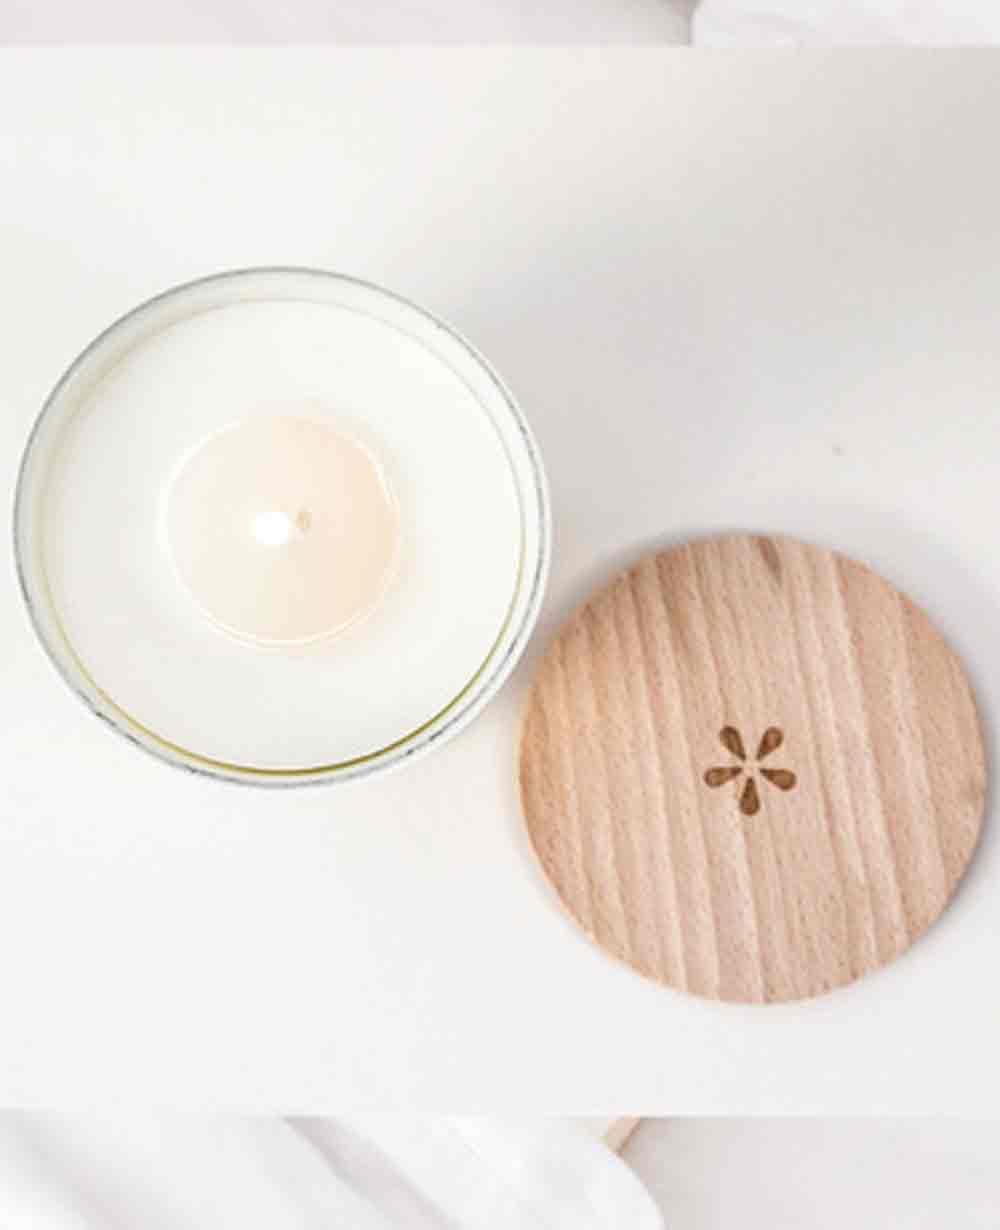 SCENTED CANDLE "FIG LEAF"